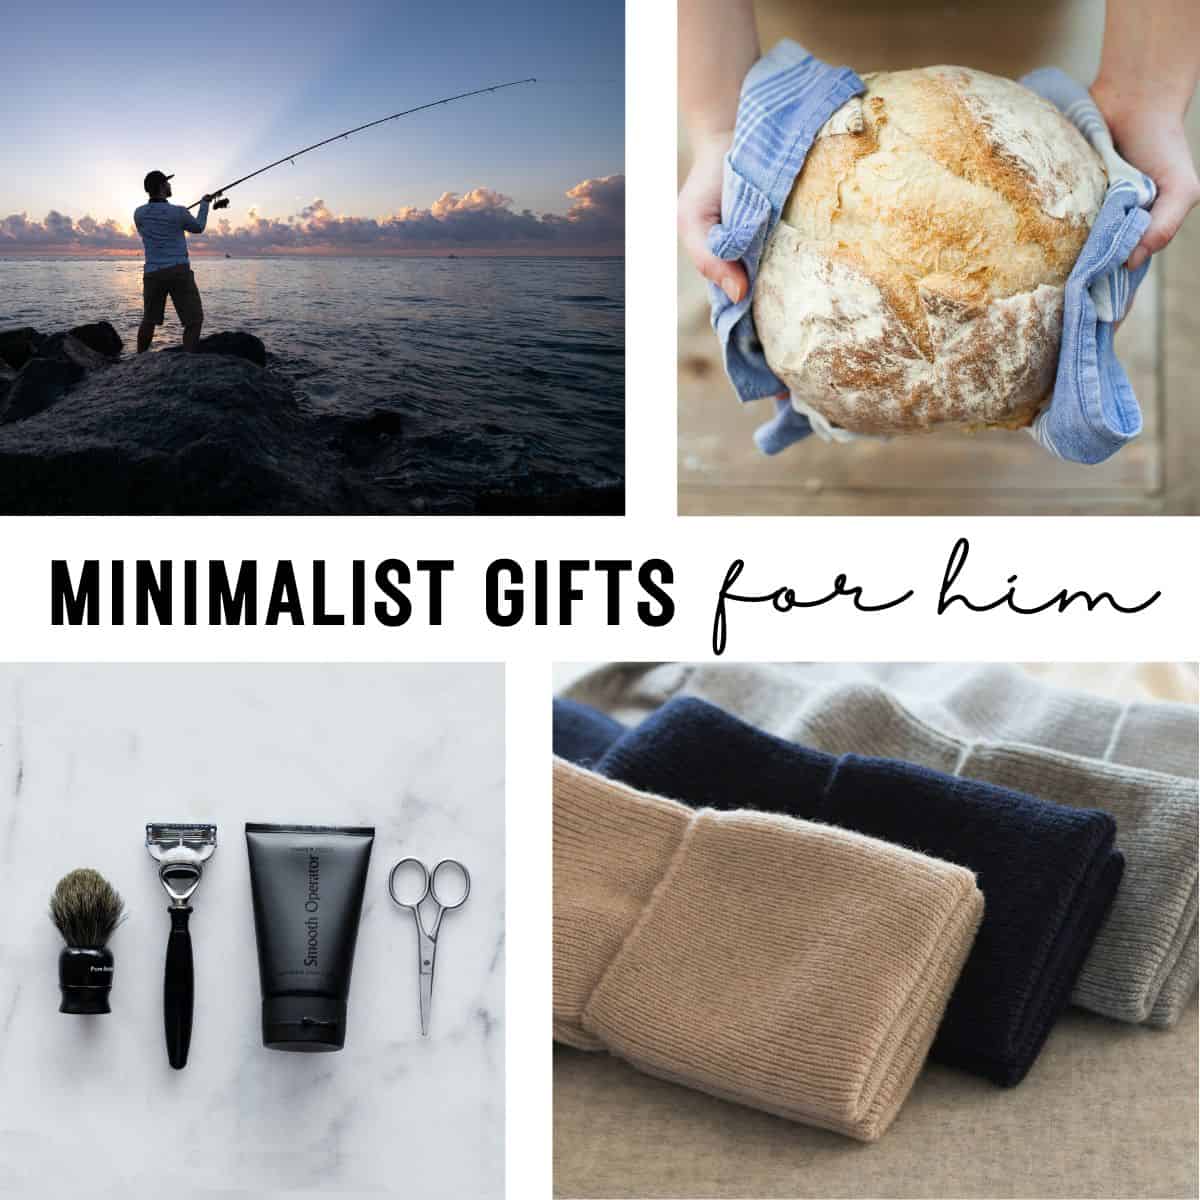 70+ Best Minimalist Gifts for Him  Clutter-Free Ideas - The Home Intent